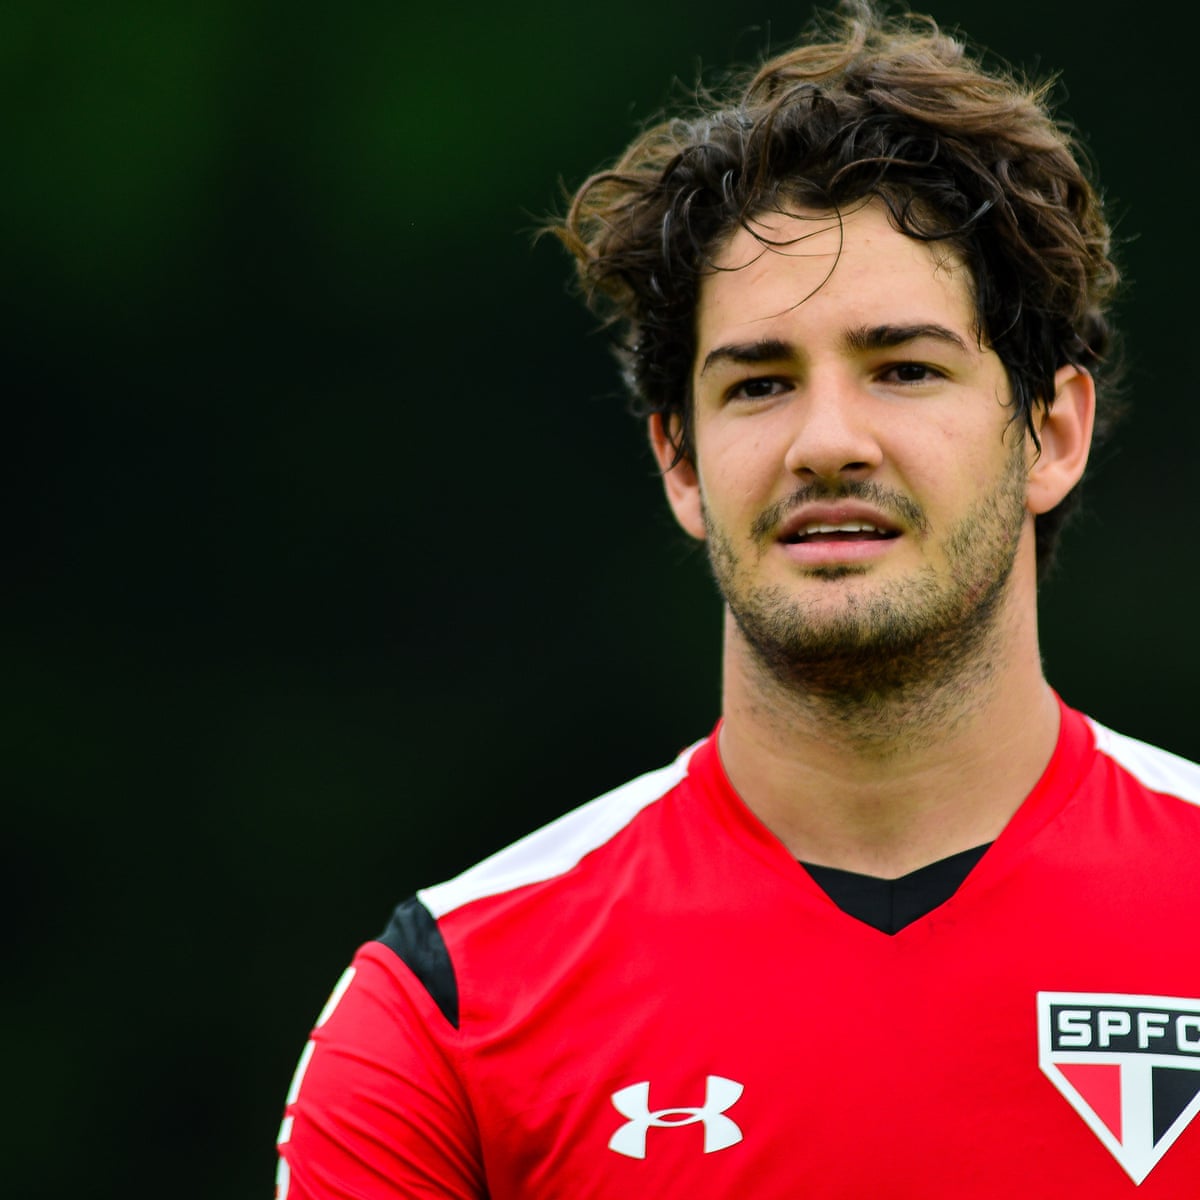 Alexandre Pato 'so happy' to be joining Chelsea after arriving in London | Chelsea | The Guardian